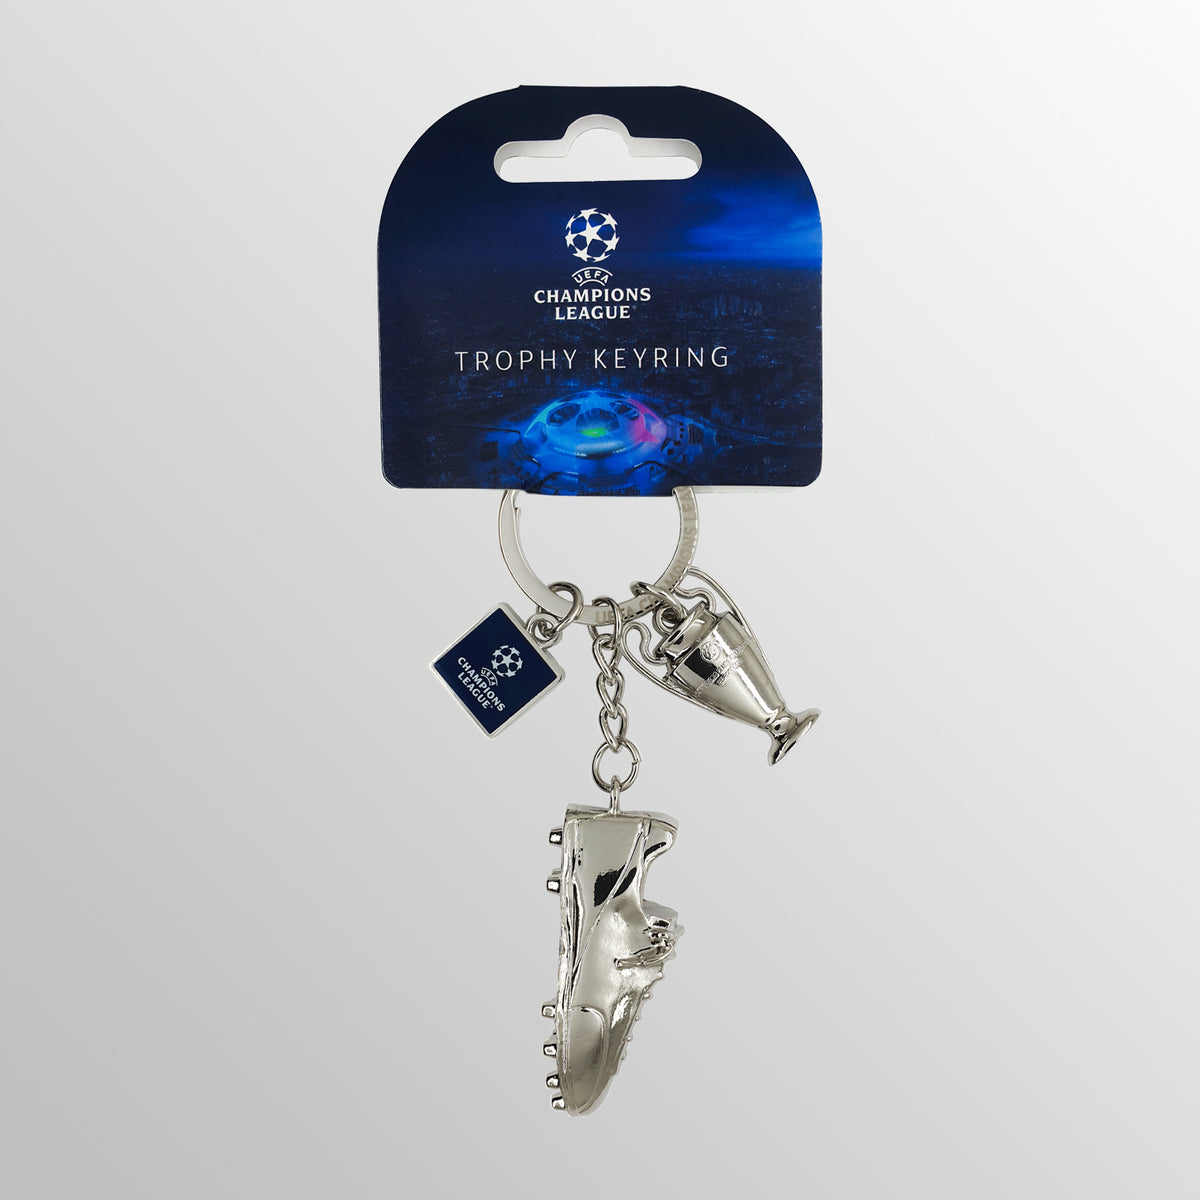 Football Boot &amp; Mini Trophy Replica Keyring UEFA Club Competitions Online Store